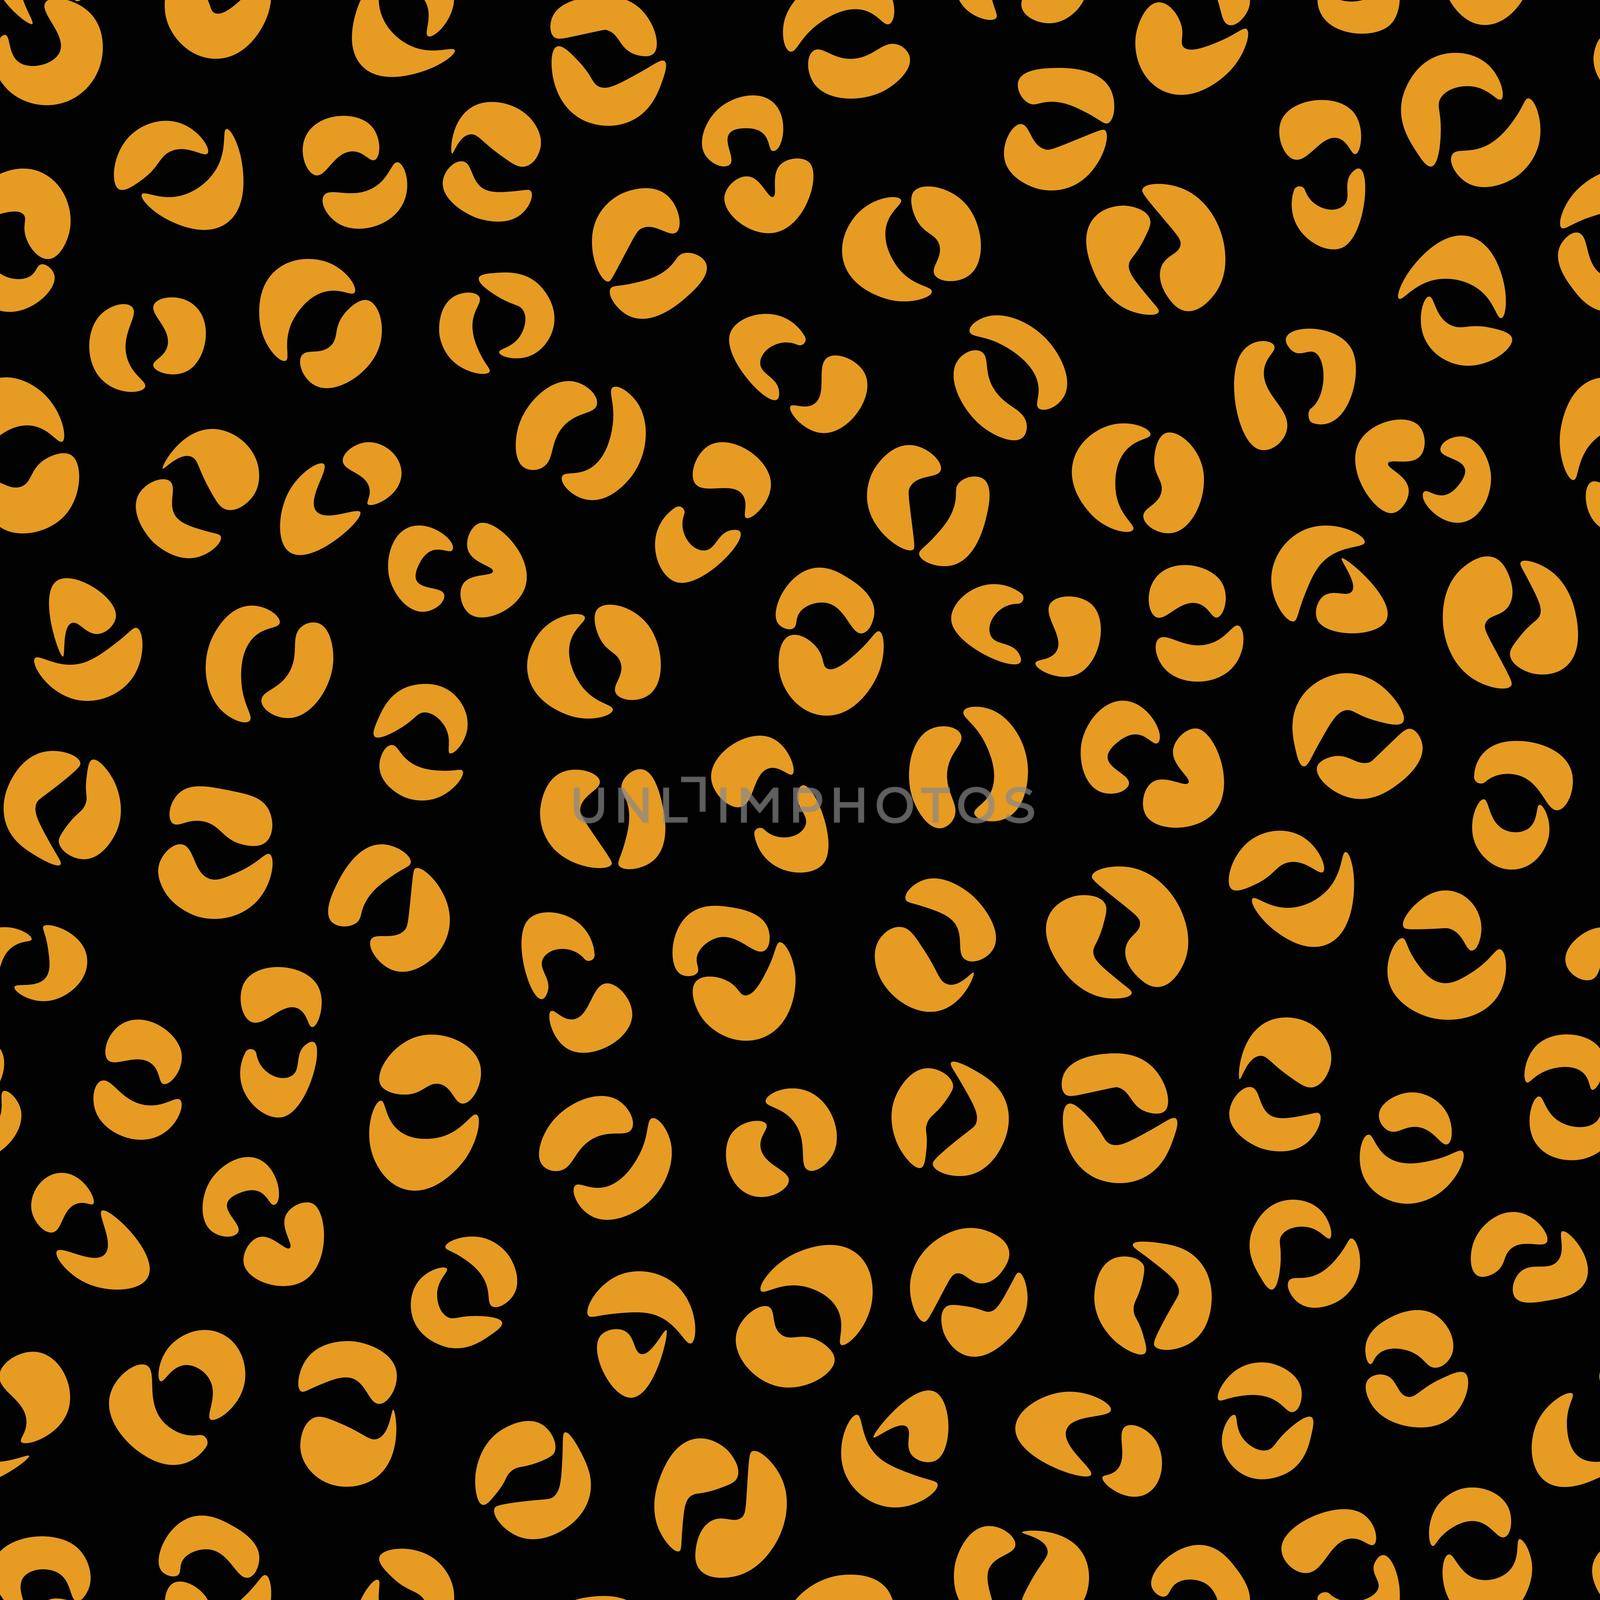 Abstract modern leopard seamless pattern. Animals trendy background. Orange and black decorative vector stock illustration for print, card, postcard, fabric, textile. Modern ornament of stylized skin by allaku